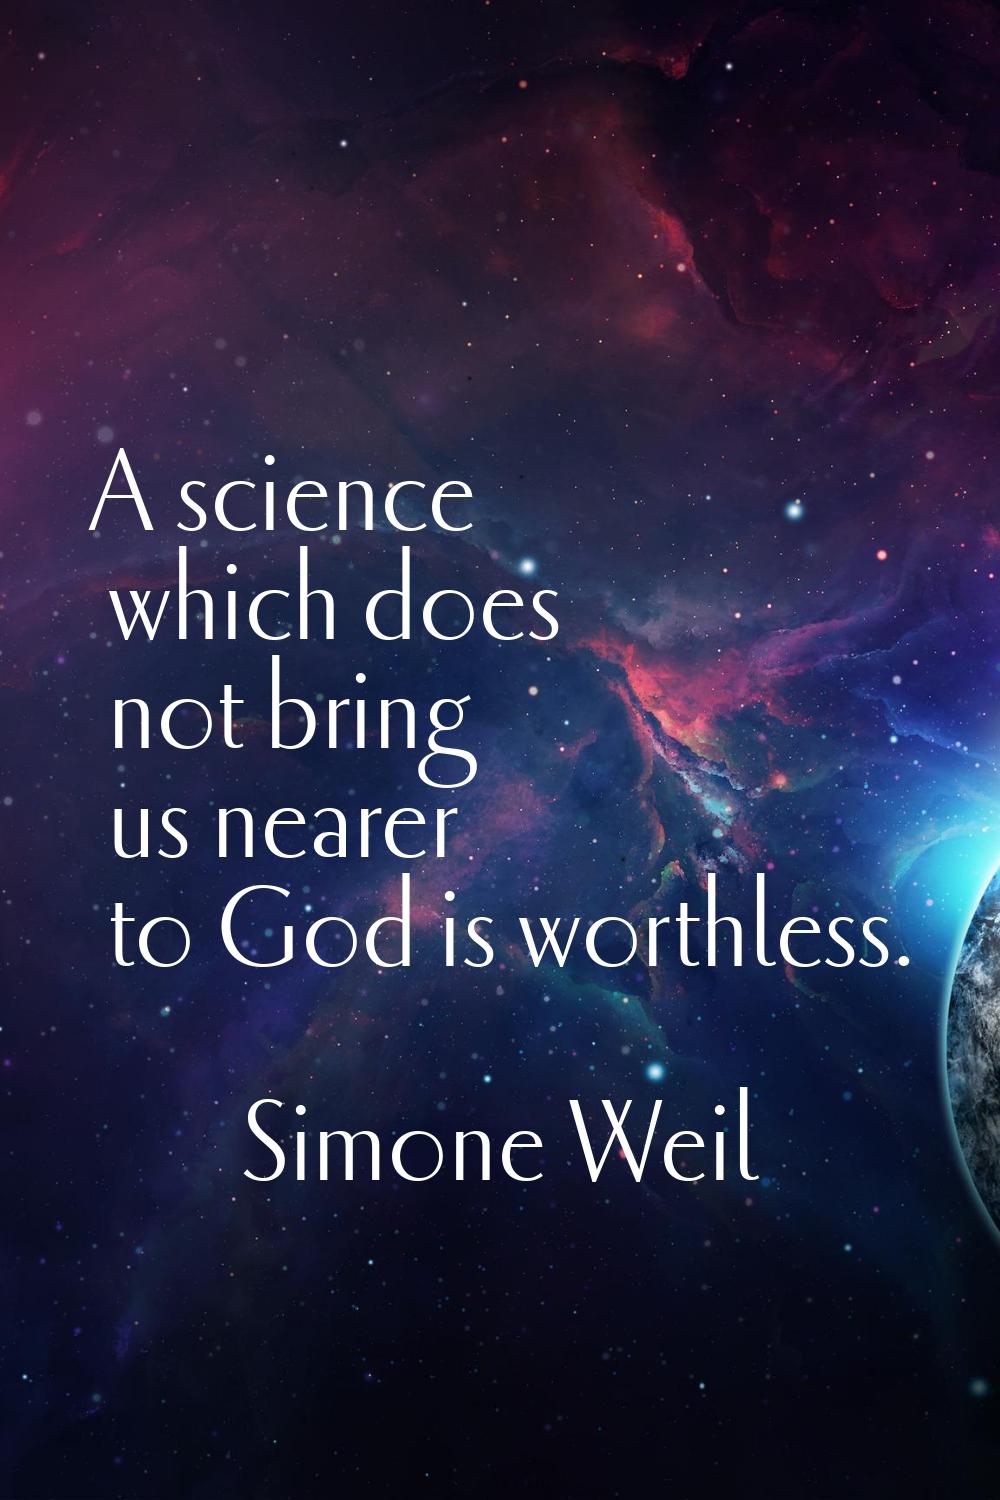 A science which does not bring us nearer to God is worthless.